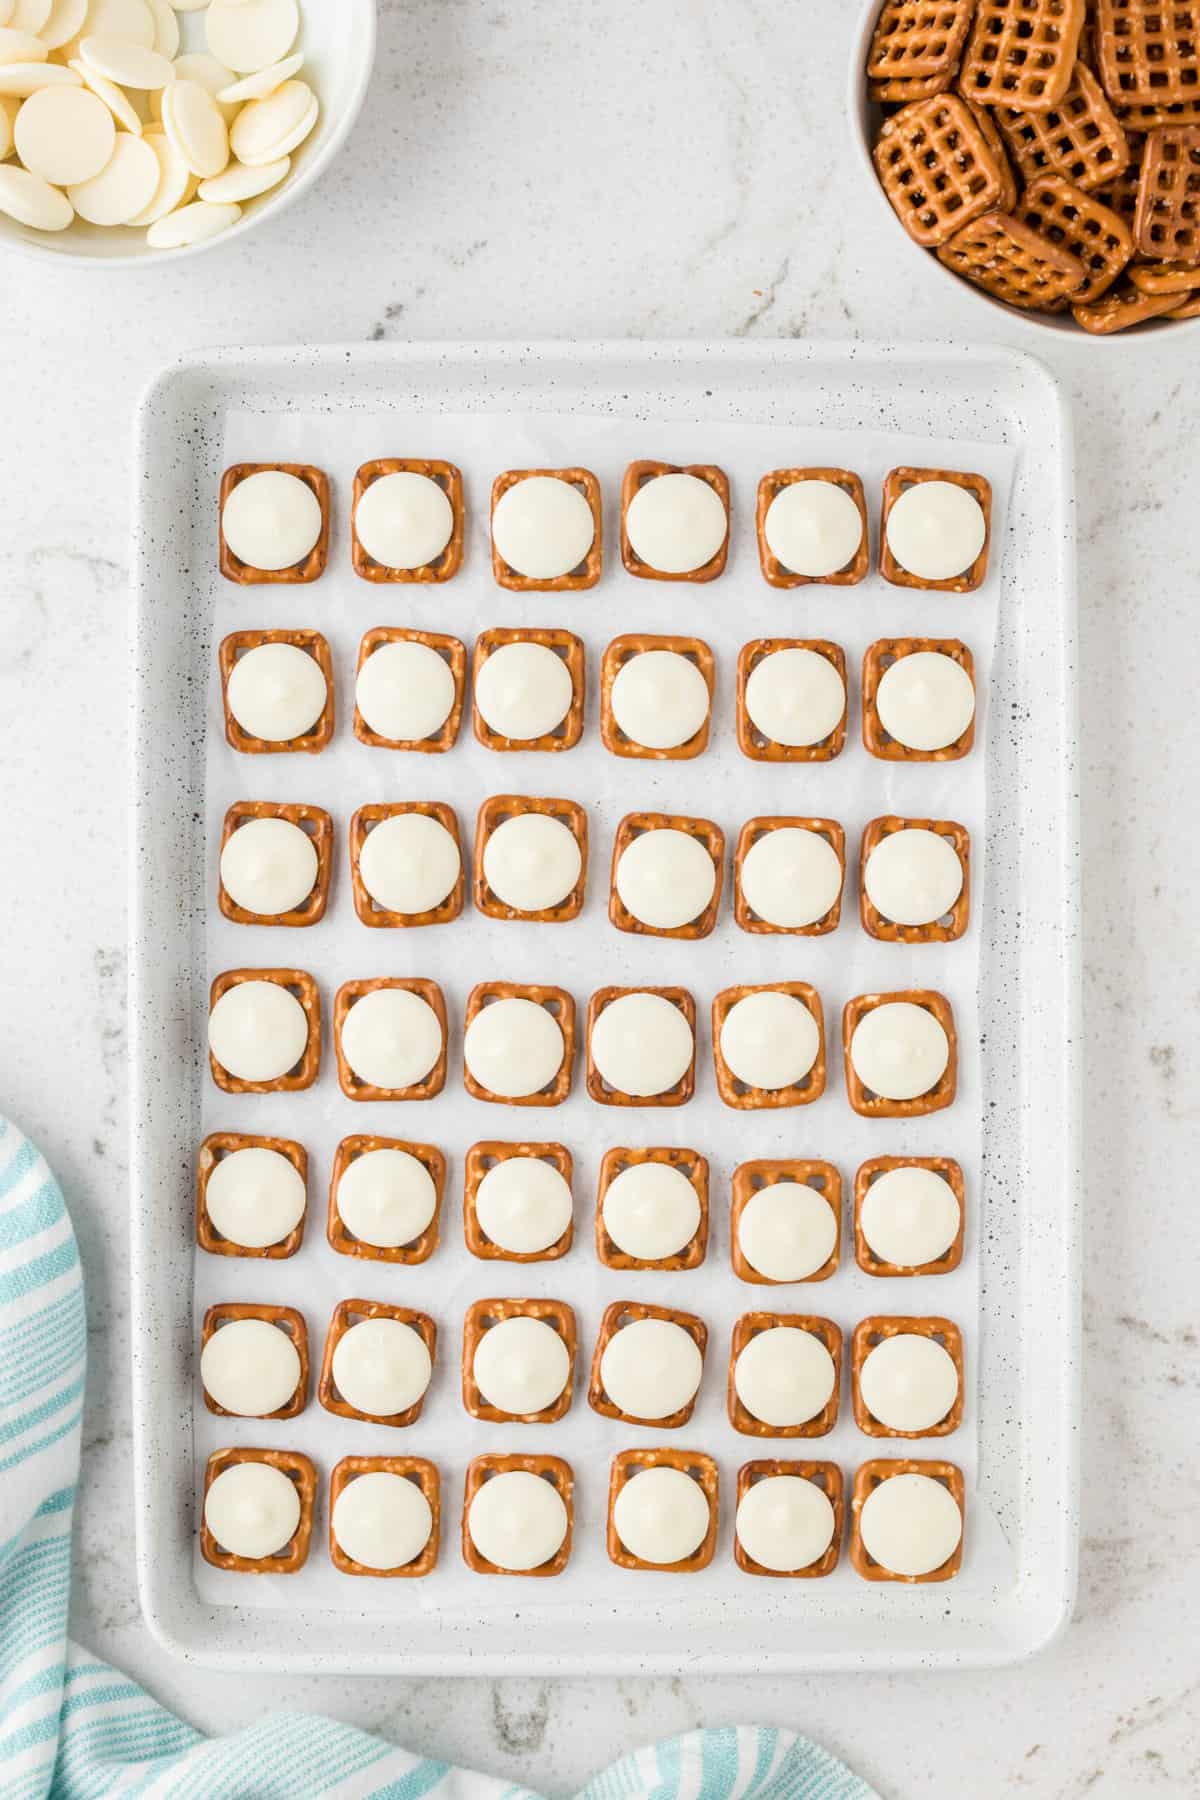 Next, place a white candy melt on each of the pretzels. Place them into the oven and melt them slightly.